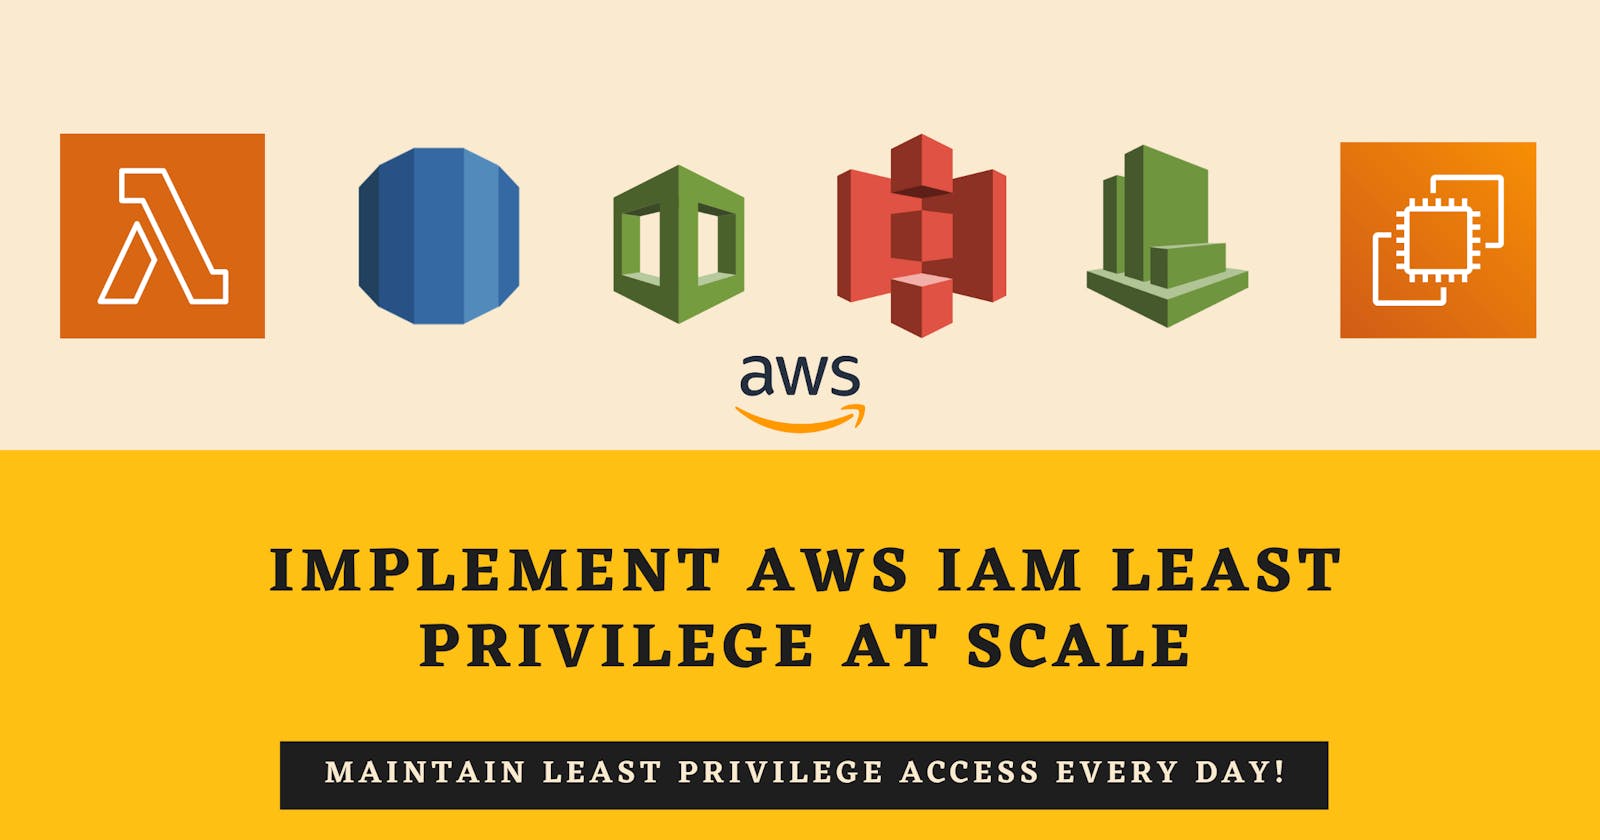 Implement AWS IAM Least Privilege at scale